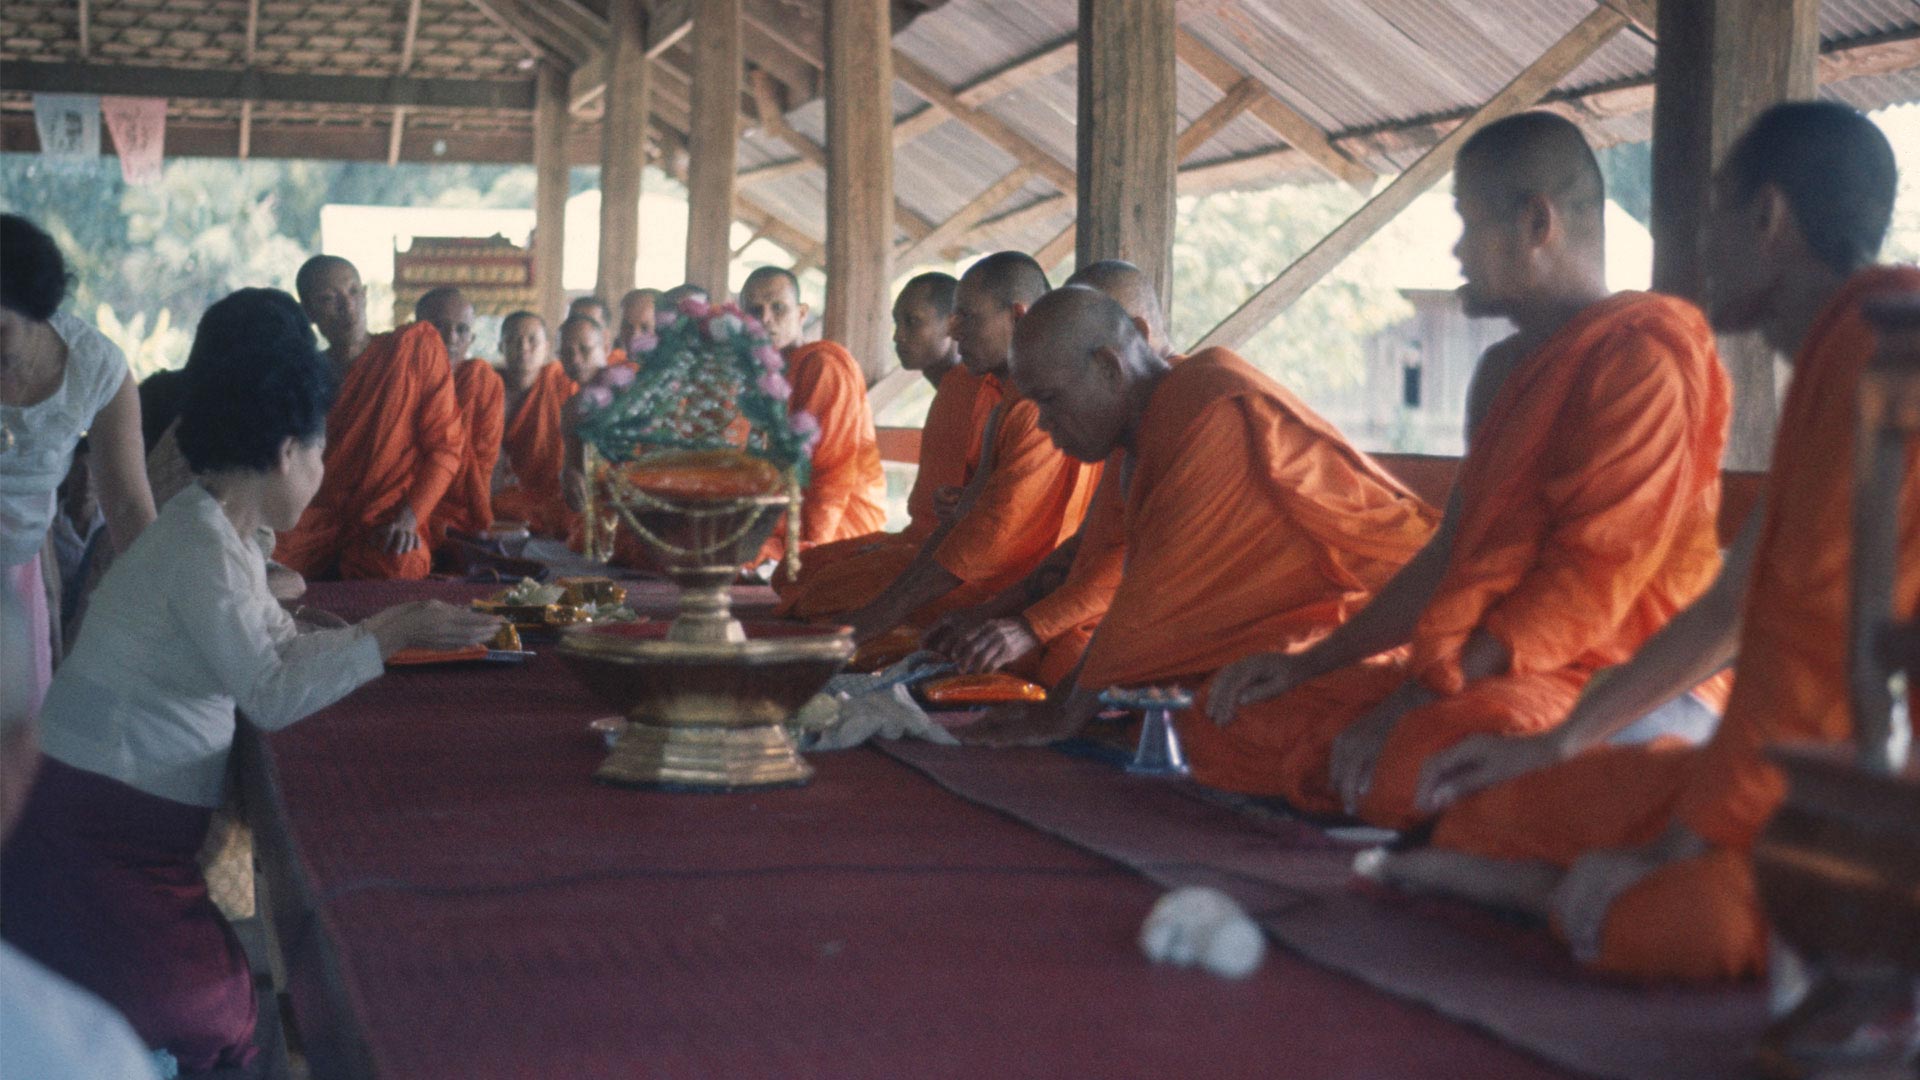 Thot Kathin: The ceremonial presentation of new robes and gifts to Buddhist monks in Thailand overview image